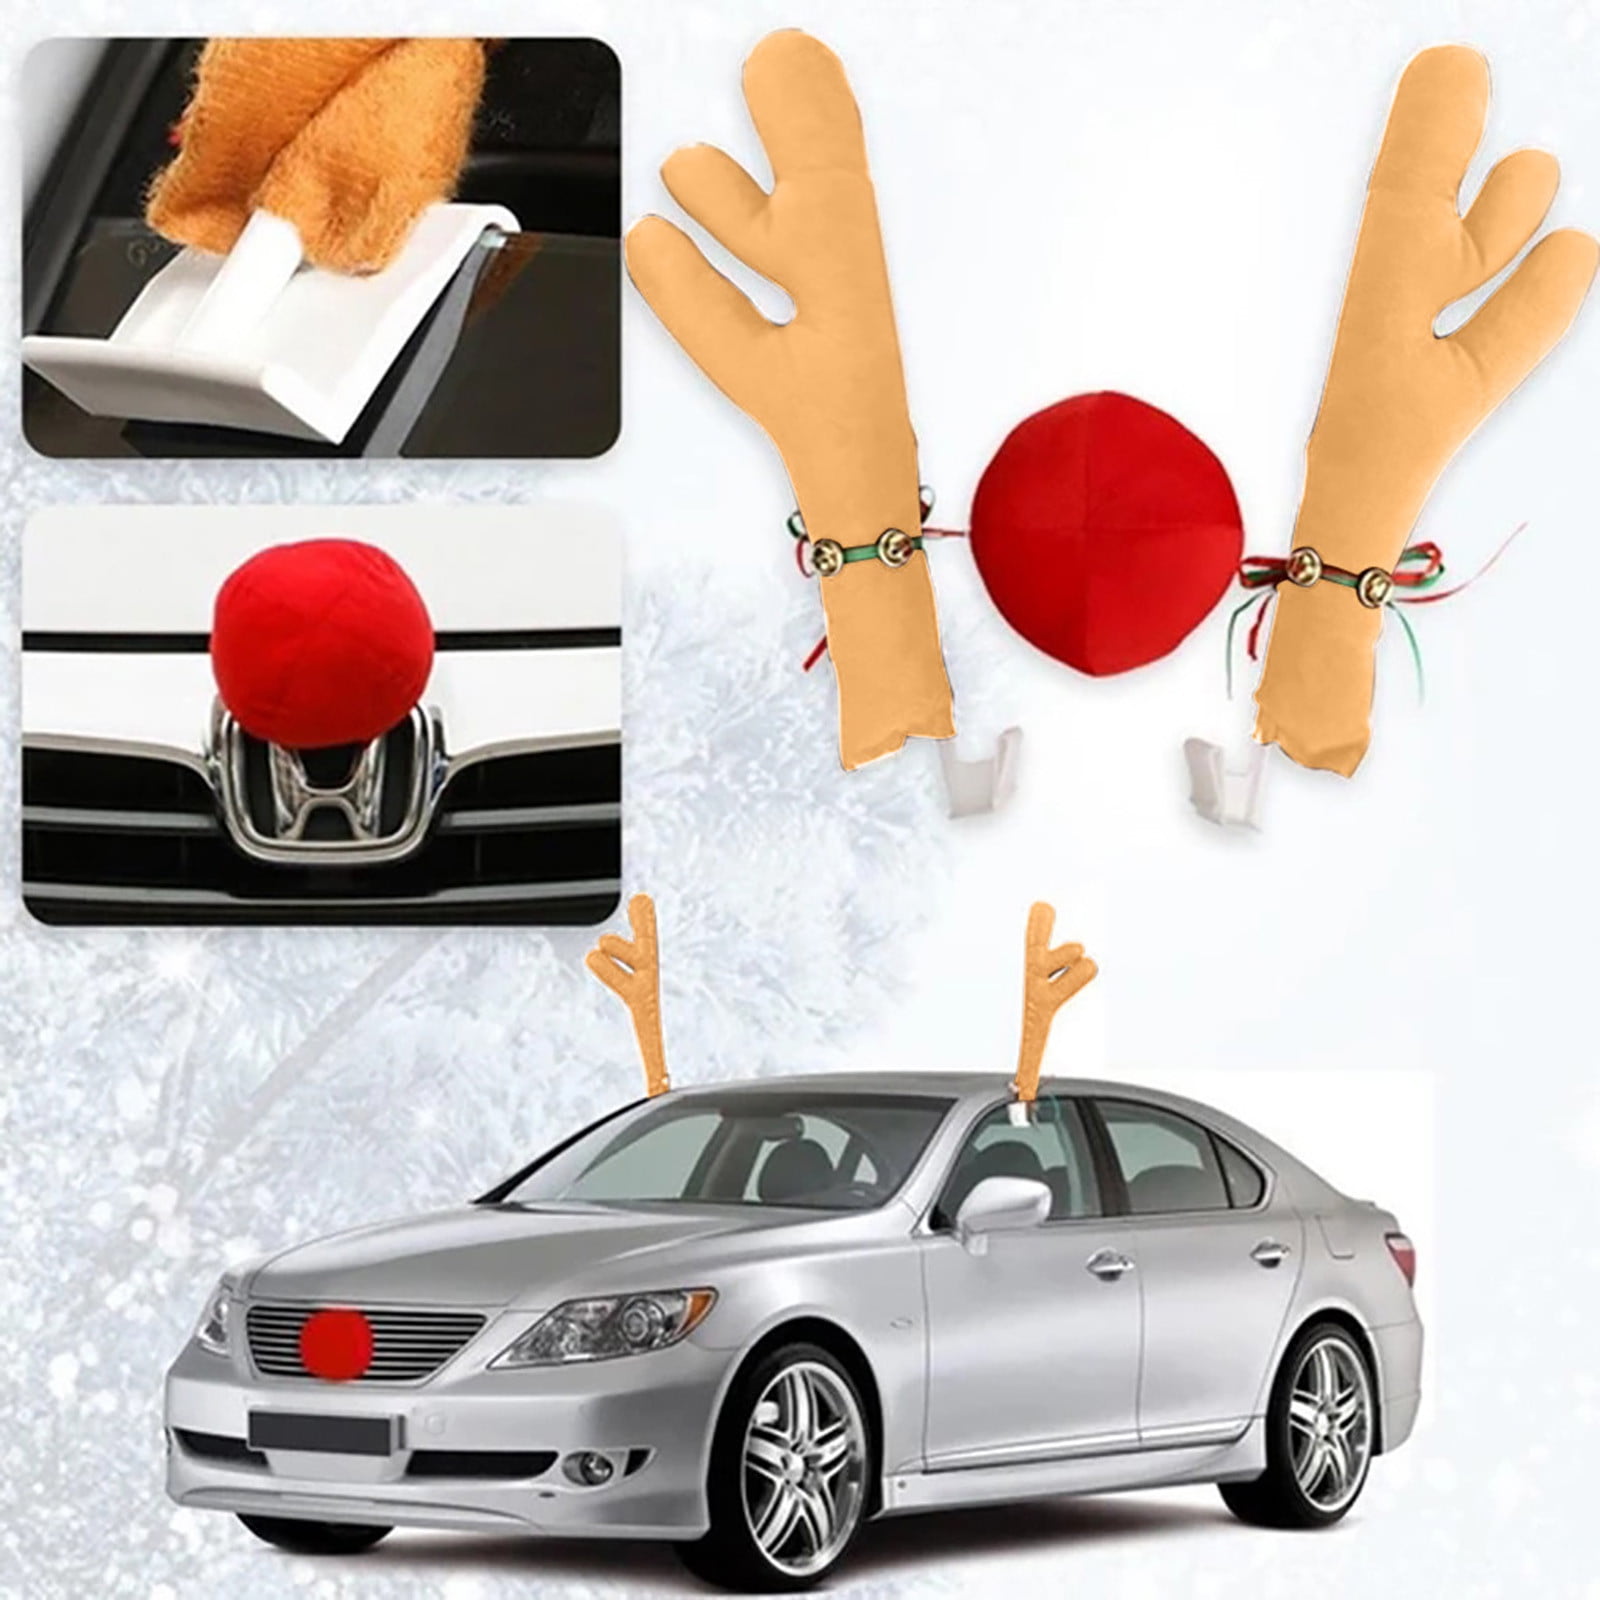 Rudolph CAR Costume Christmas Reindeer Antlers & red nose for Truck Suv Decor 